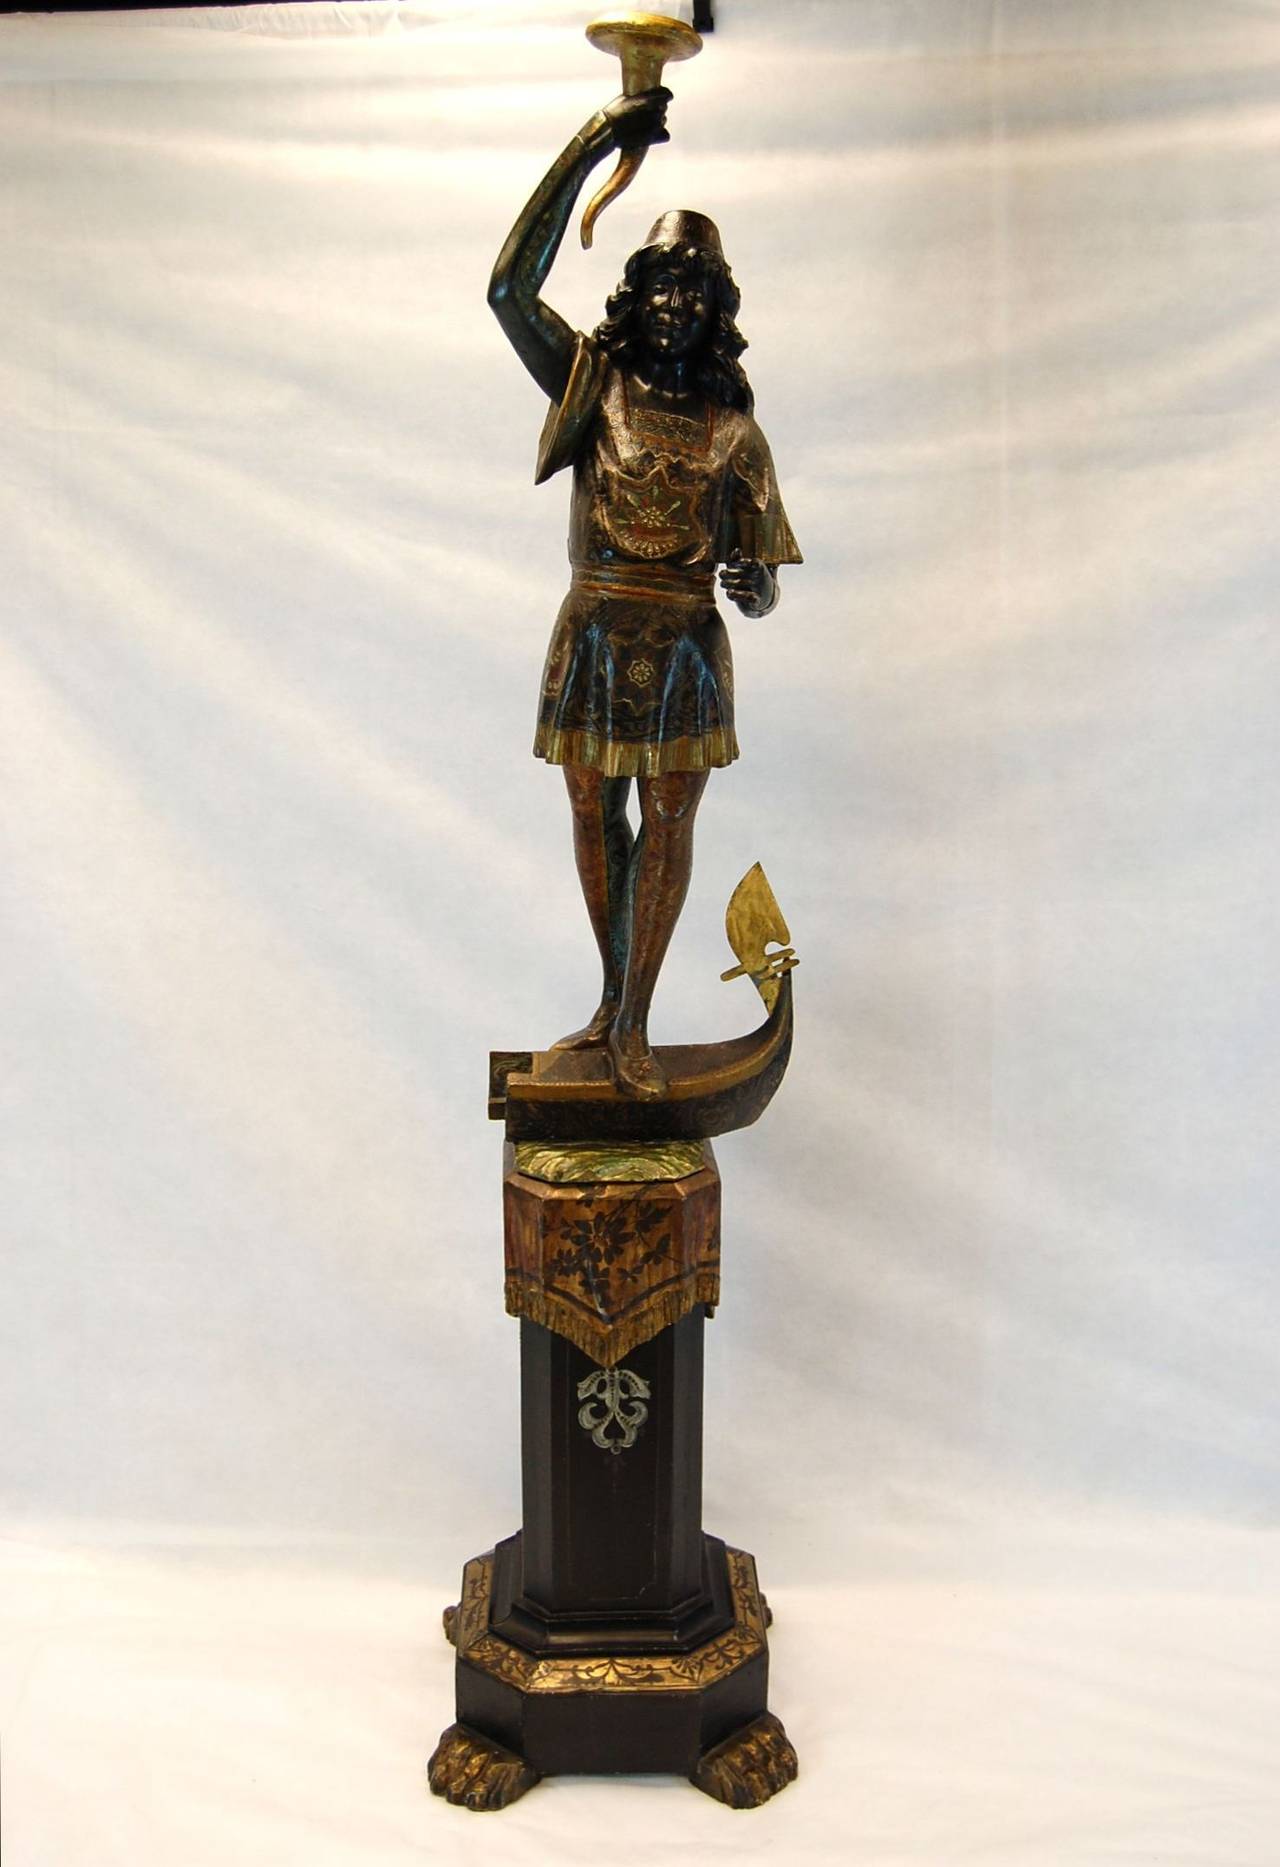 Mid-19th century male figure on gondola with elaborately carved pedestal. Top portion, 43.75